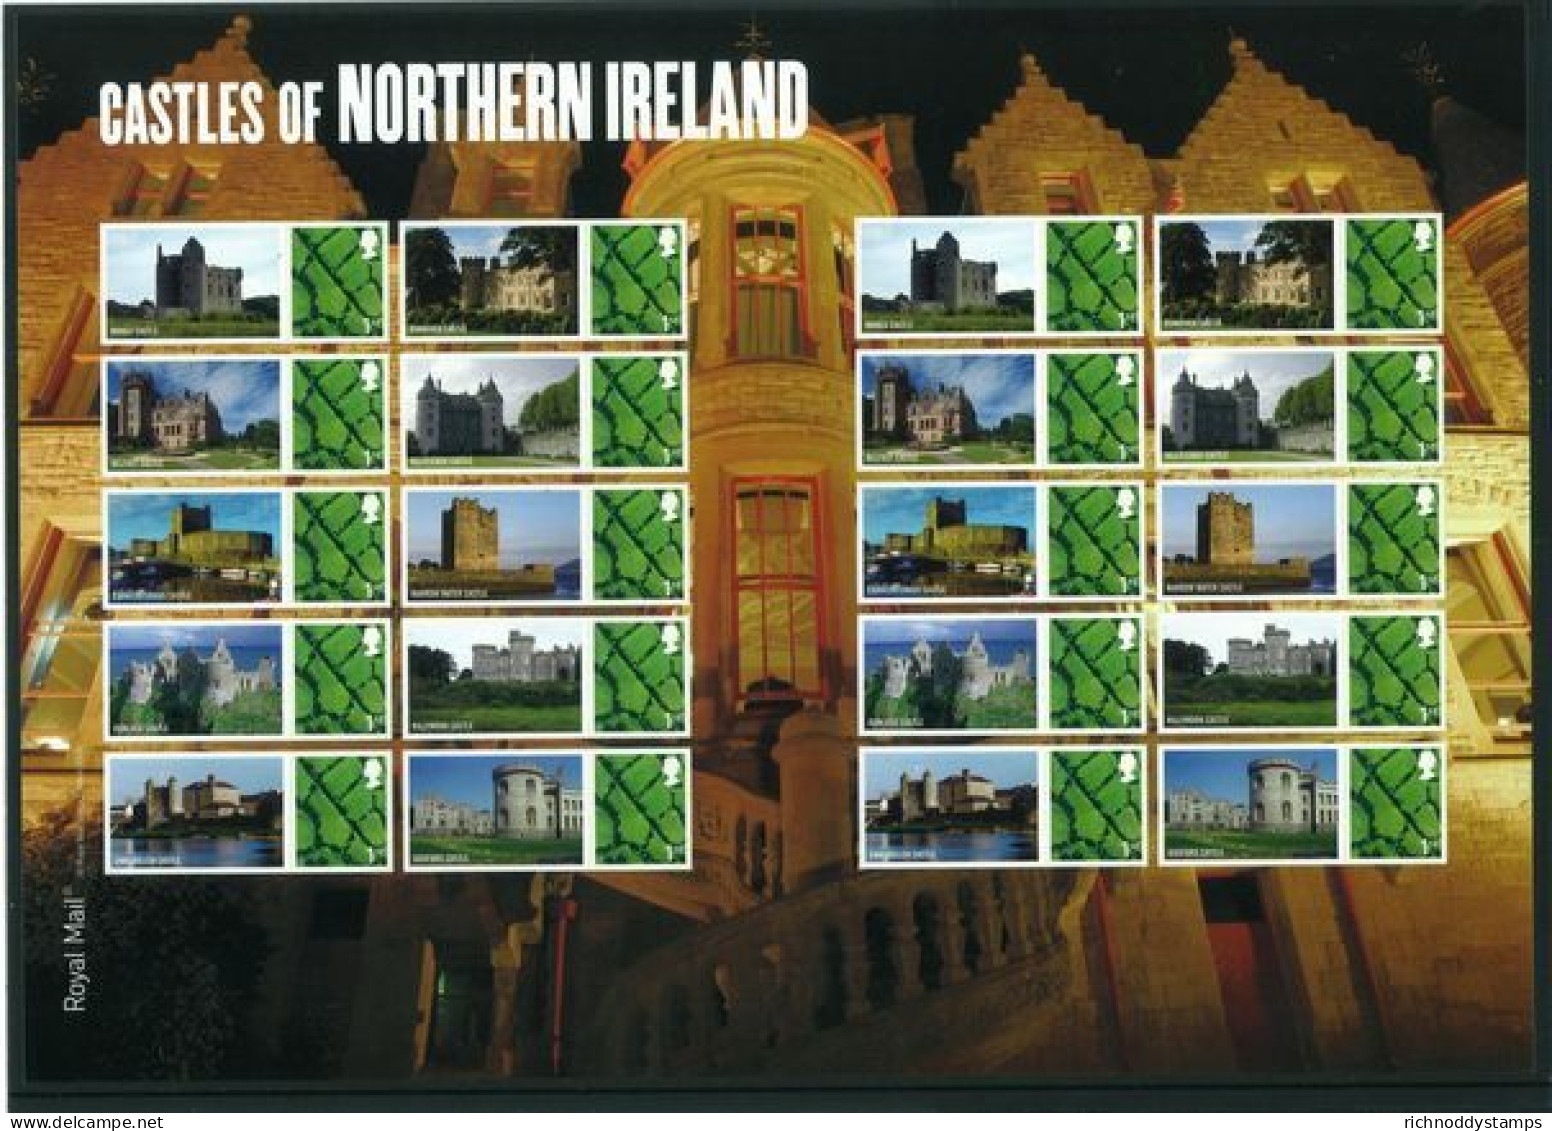 2009 Nothern Ireland Castles Patchwork Fields 1st Class Smilers Unmounted Mint.  - Francobolli Personalizzati